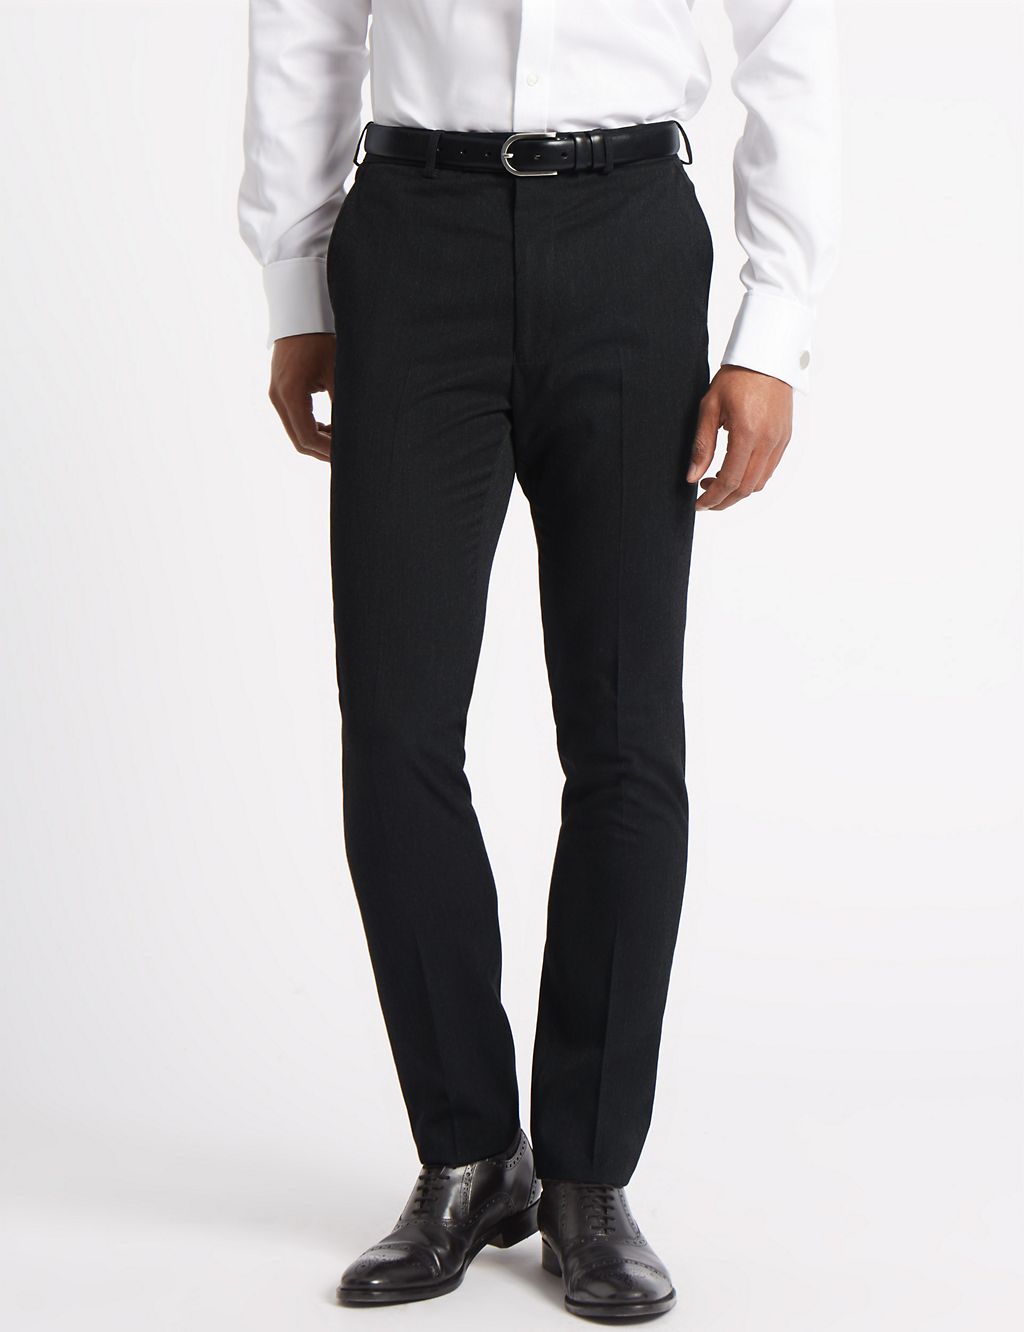 Charcoal Modern Slim Fit Trousers 3 of 5